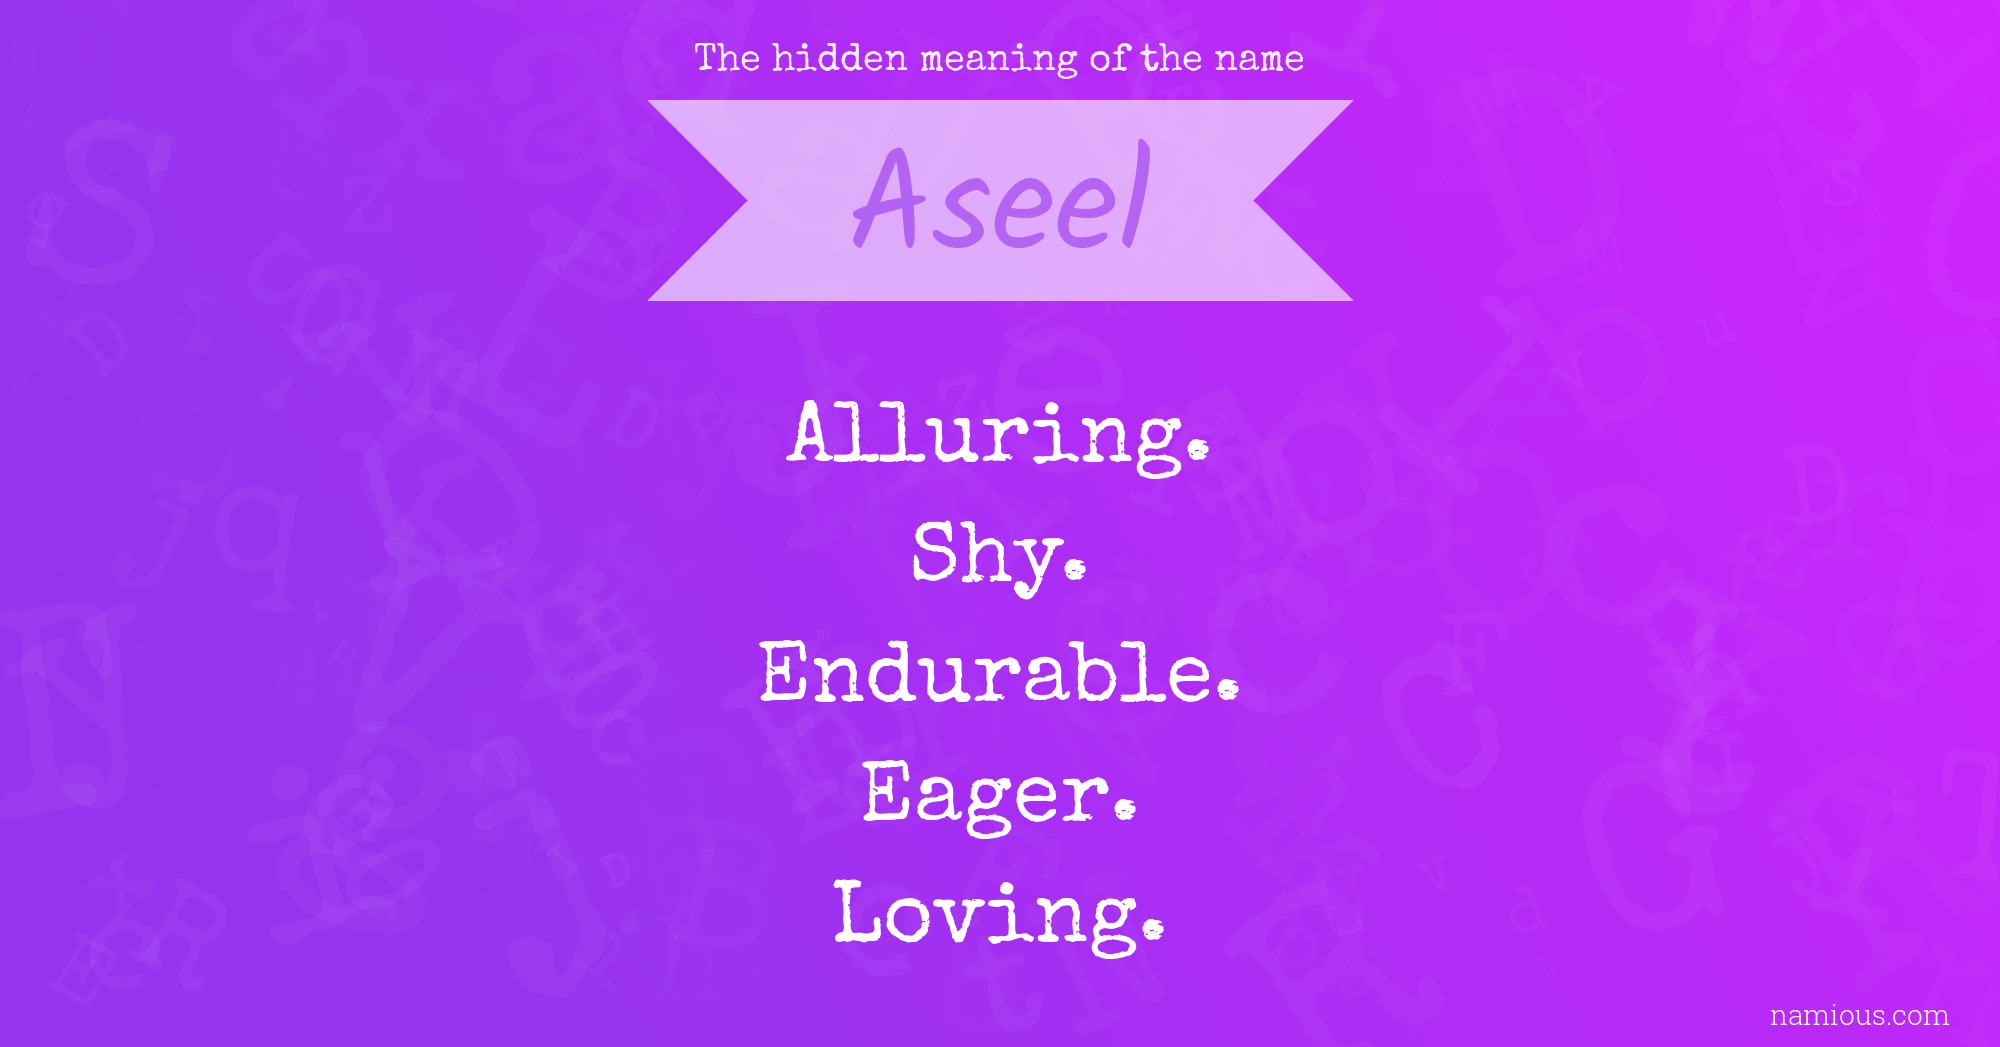 The hidden meaning of the name Aseel